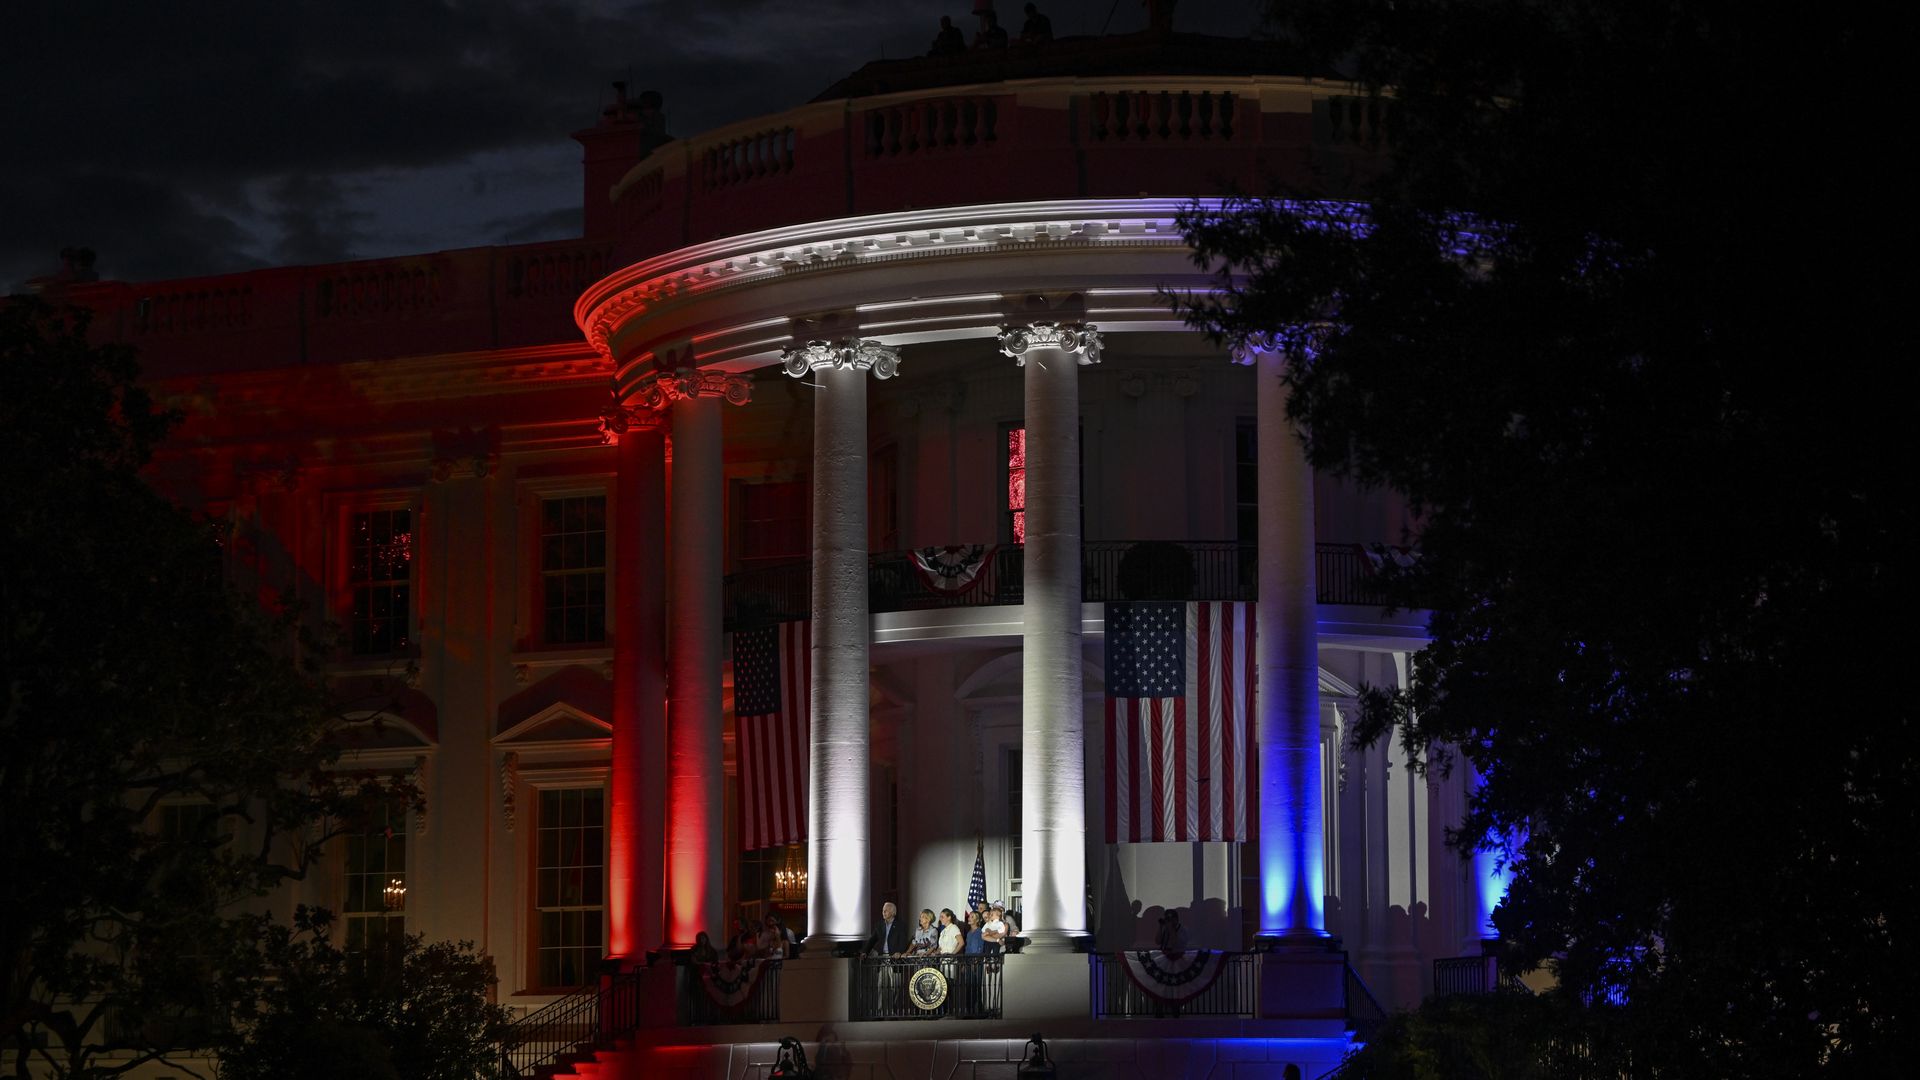 US President Joe Biden and First Lady Jill Biden attends the Fourth of July celebration event at the White House in Washington D.C., United States on July 4, 2023.